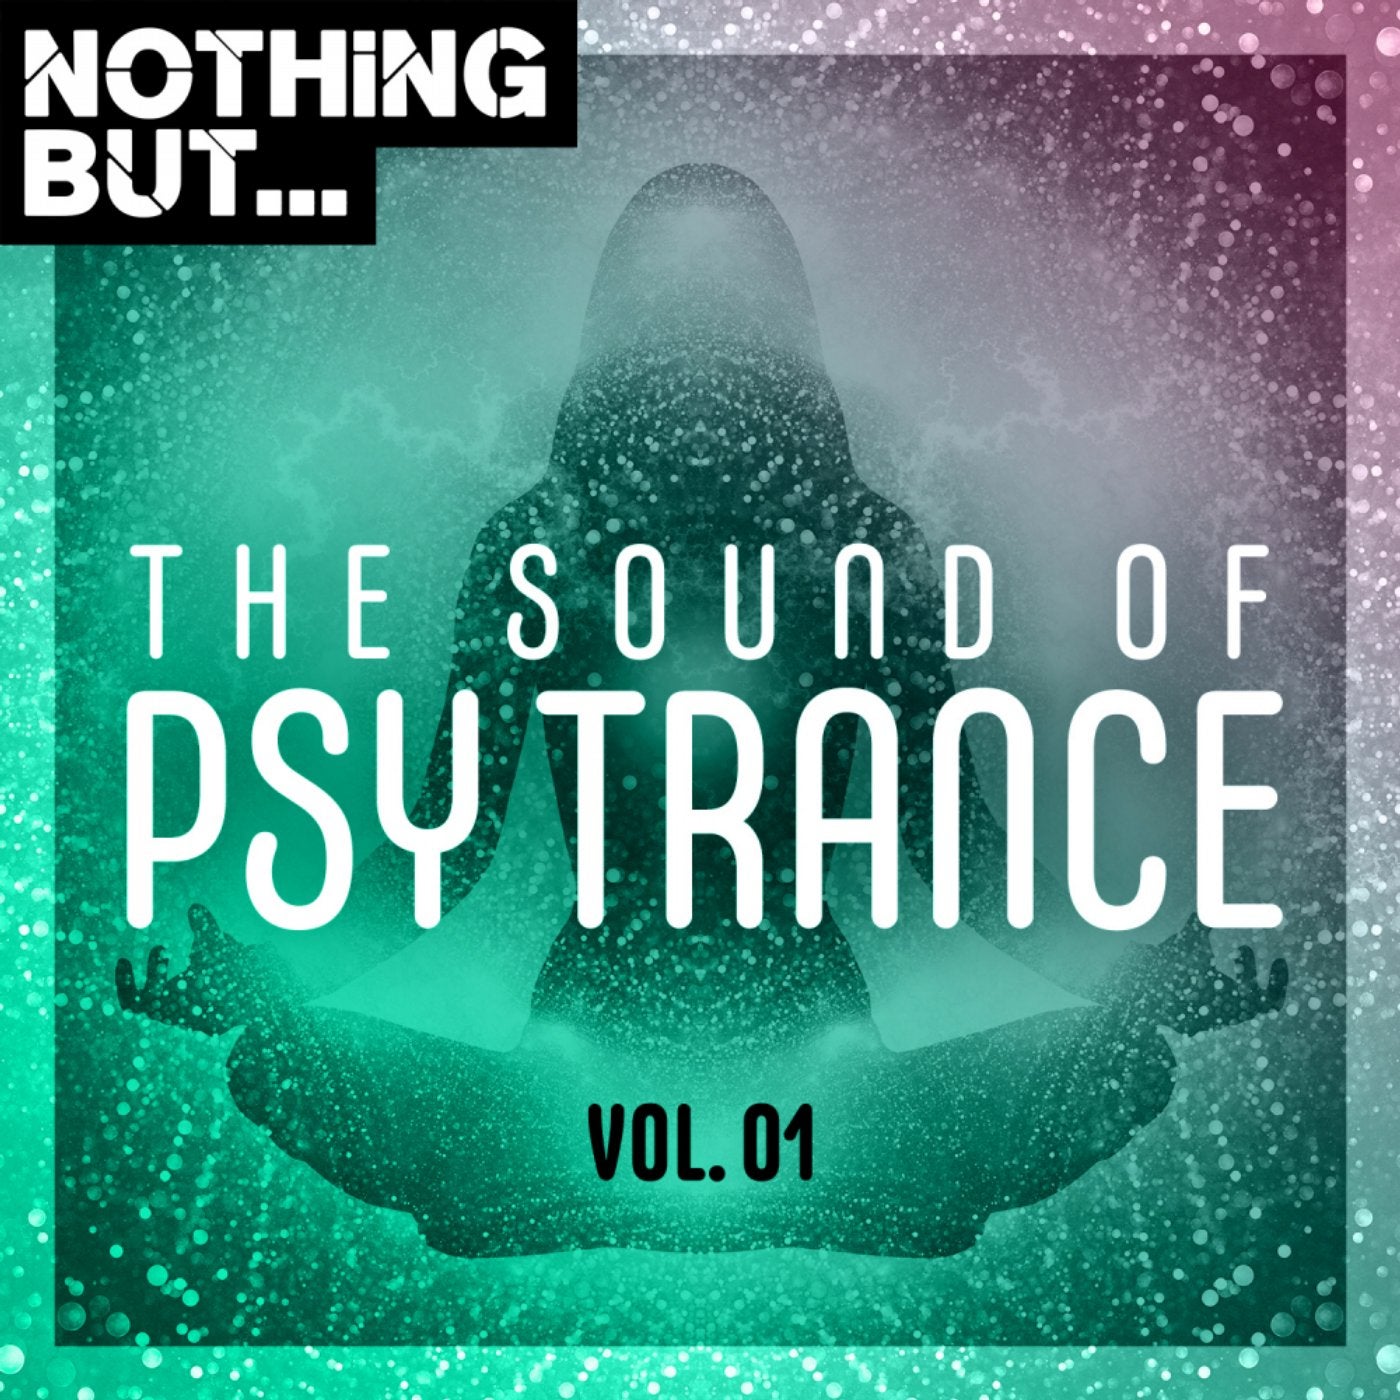 Nothing But... The Sound of Psy Trance, Vol. 01